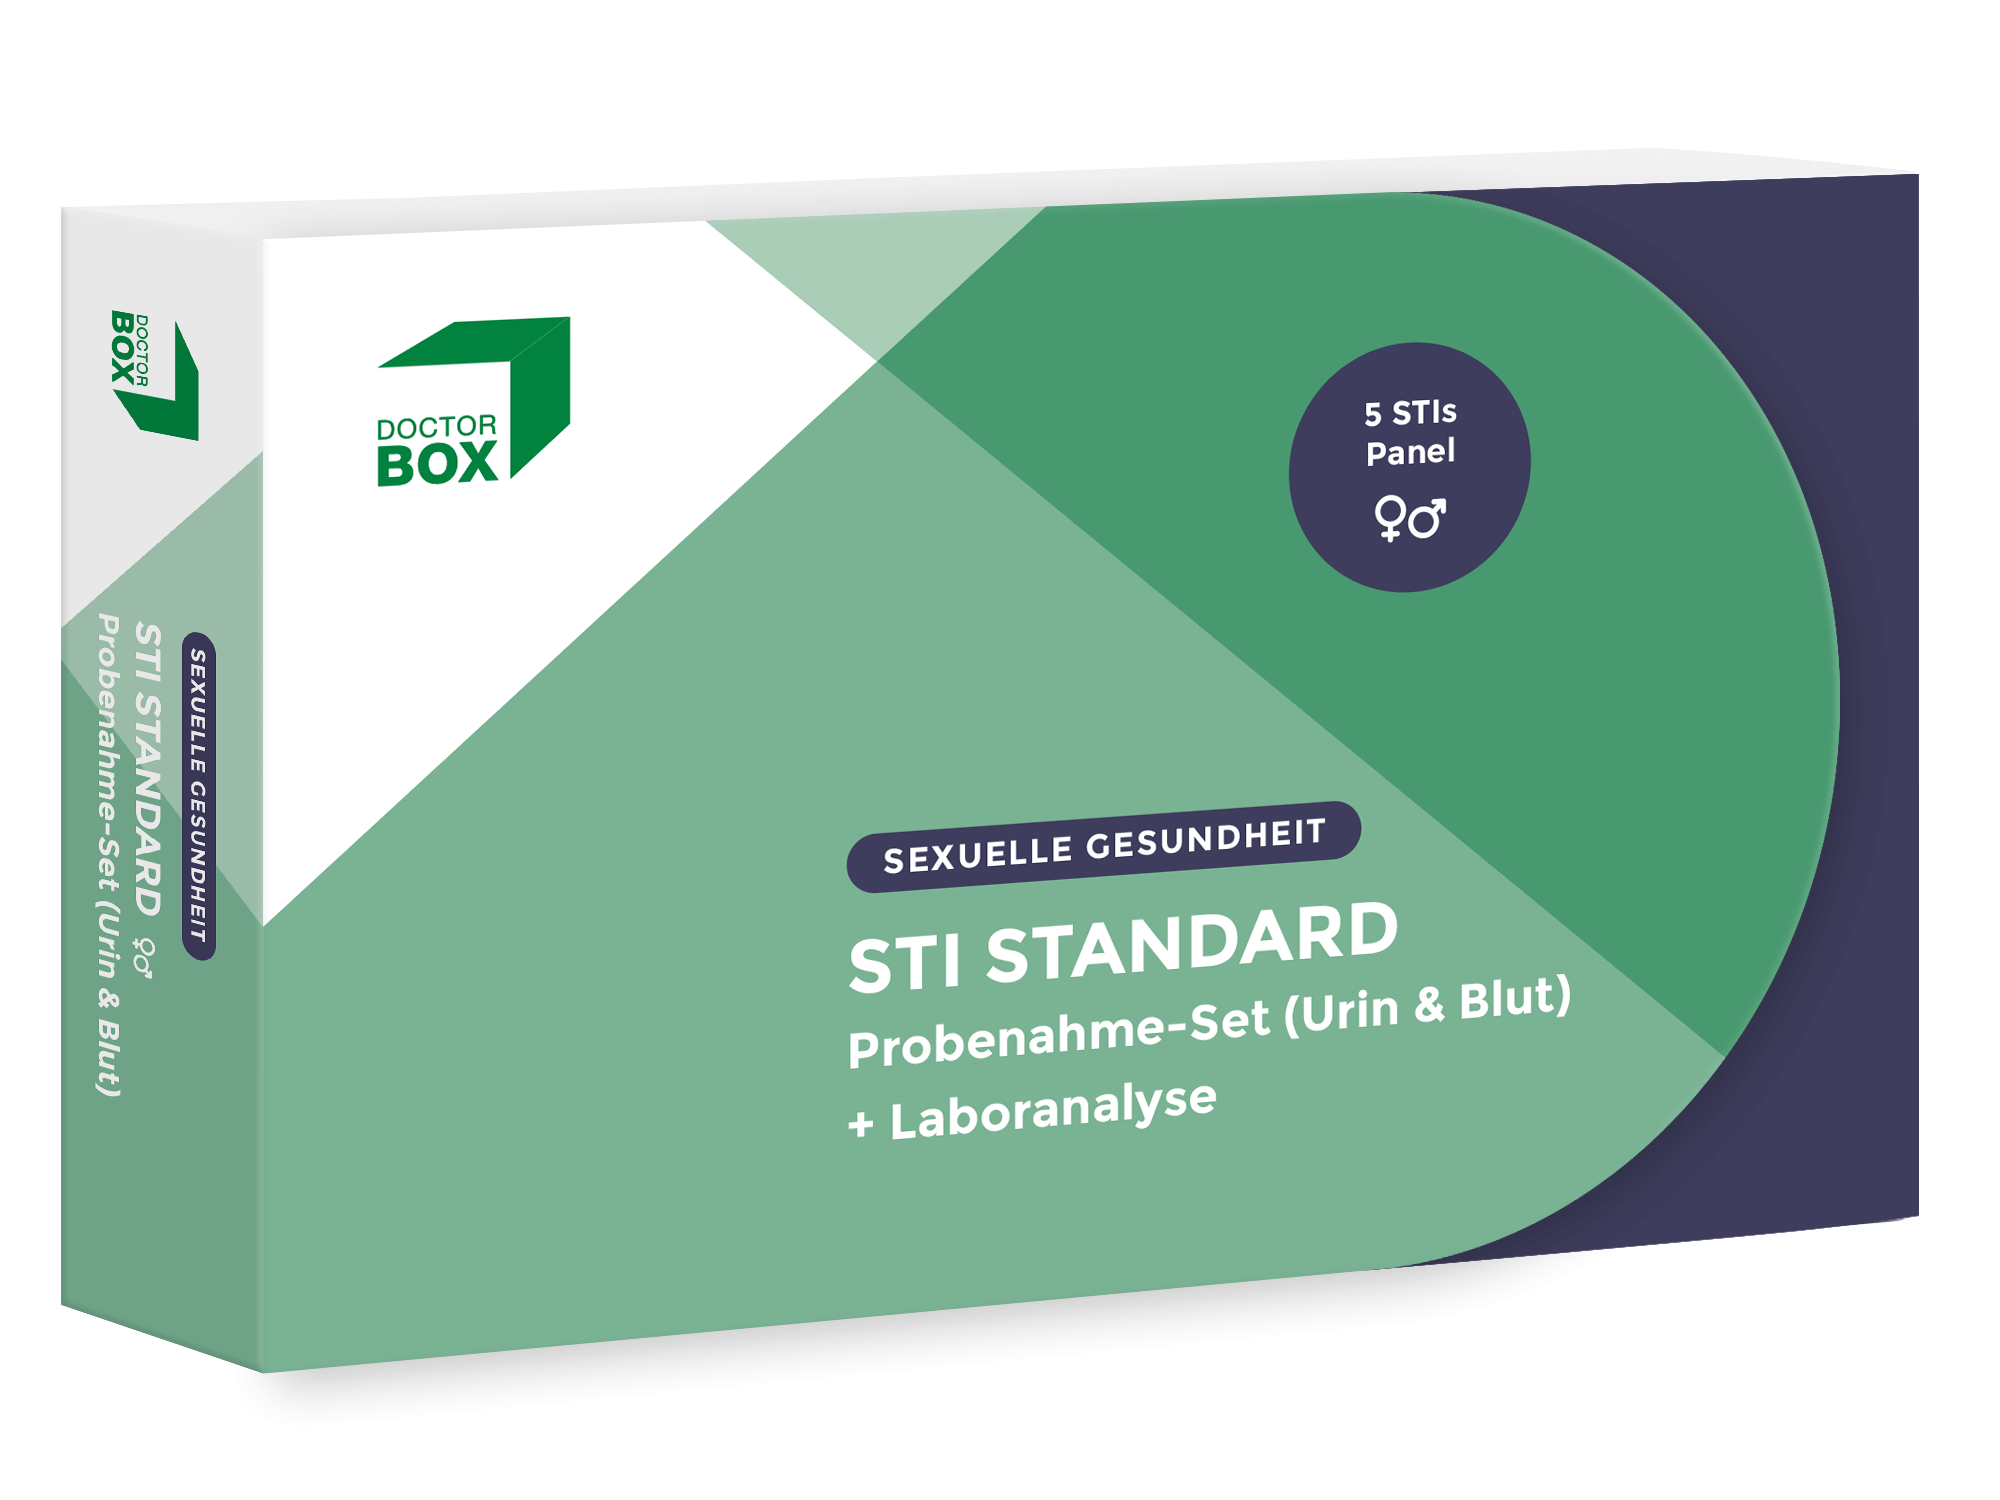 STI Test Standard - Sexually Transmitted Disease Test